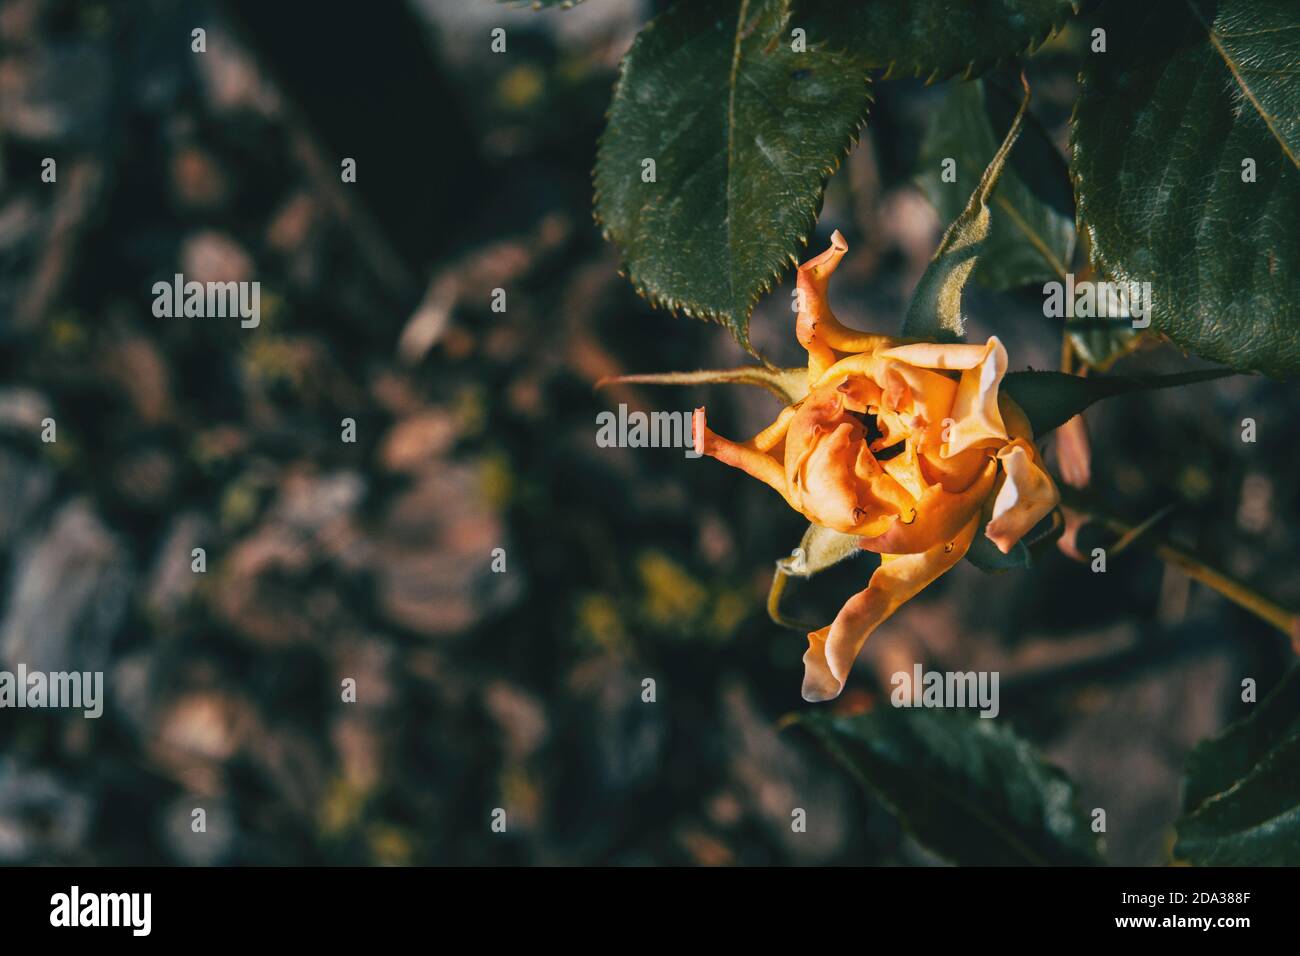 Close-up of an orange rose with twisted petals in nature Stock Photo